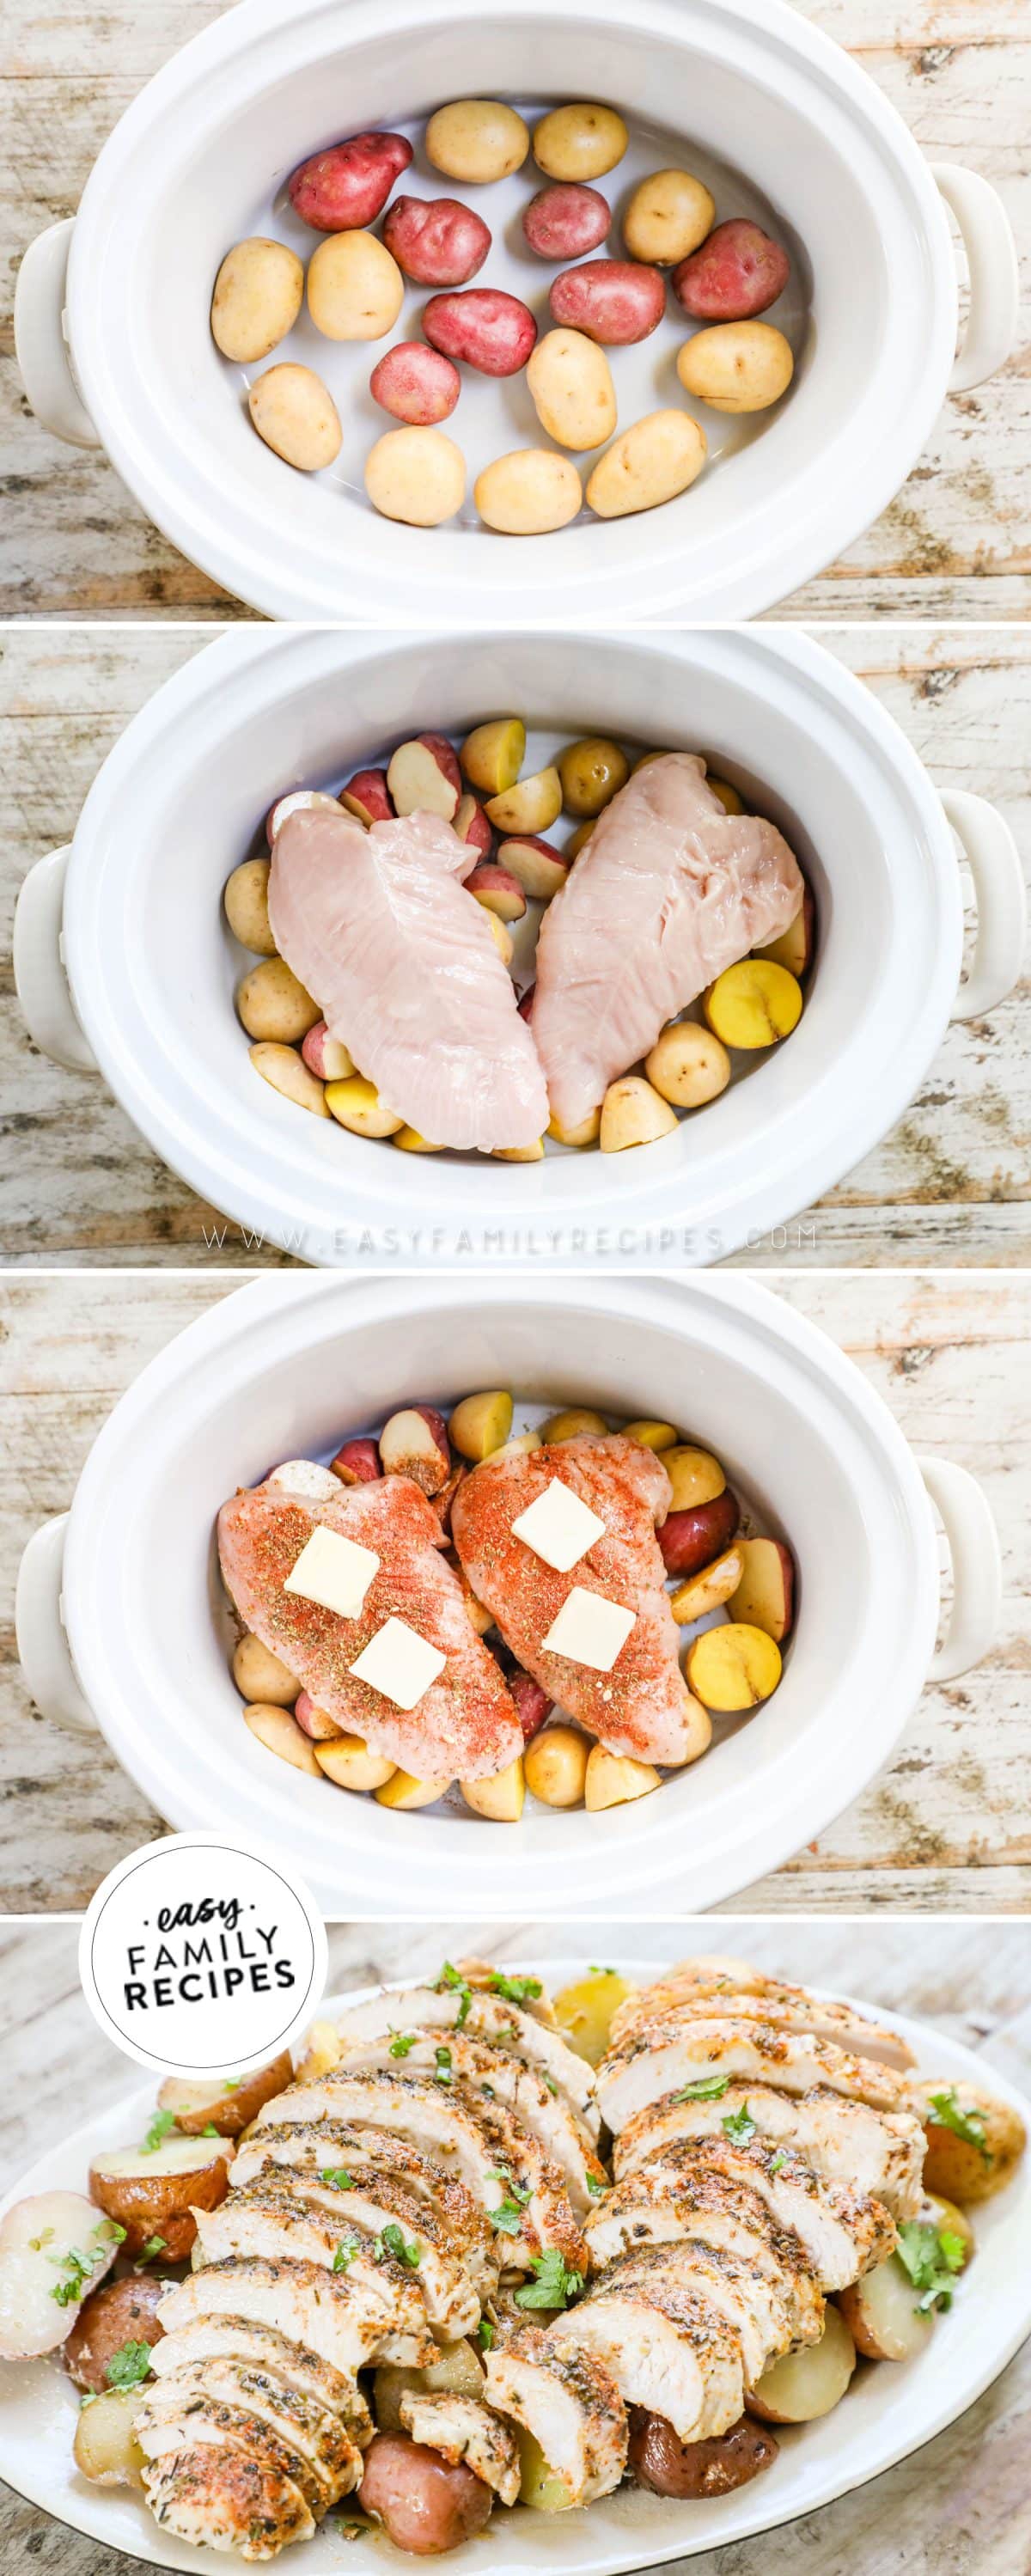 How to make crock pot turkey tenderloin 1. Place small potatoes on botton 2. Lay raw turkey tenderloins on top of potatoes 3. Season tenderloins, add pats of butter and cook.